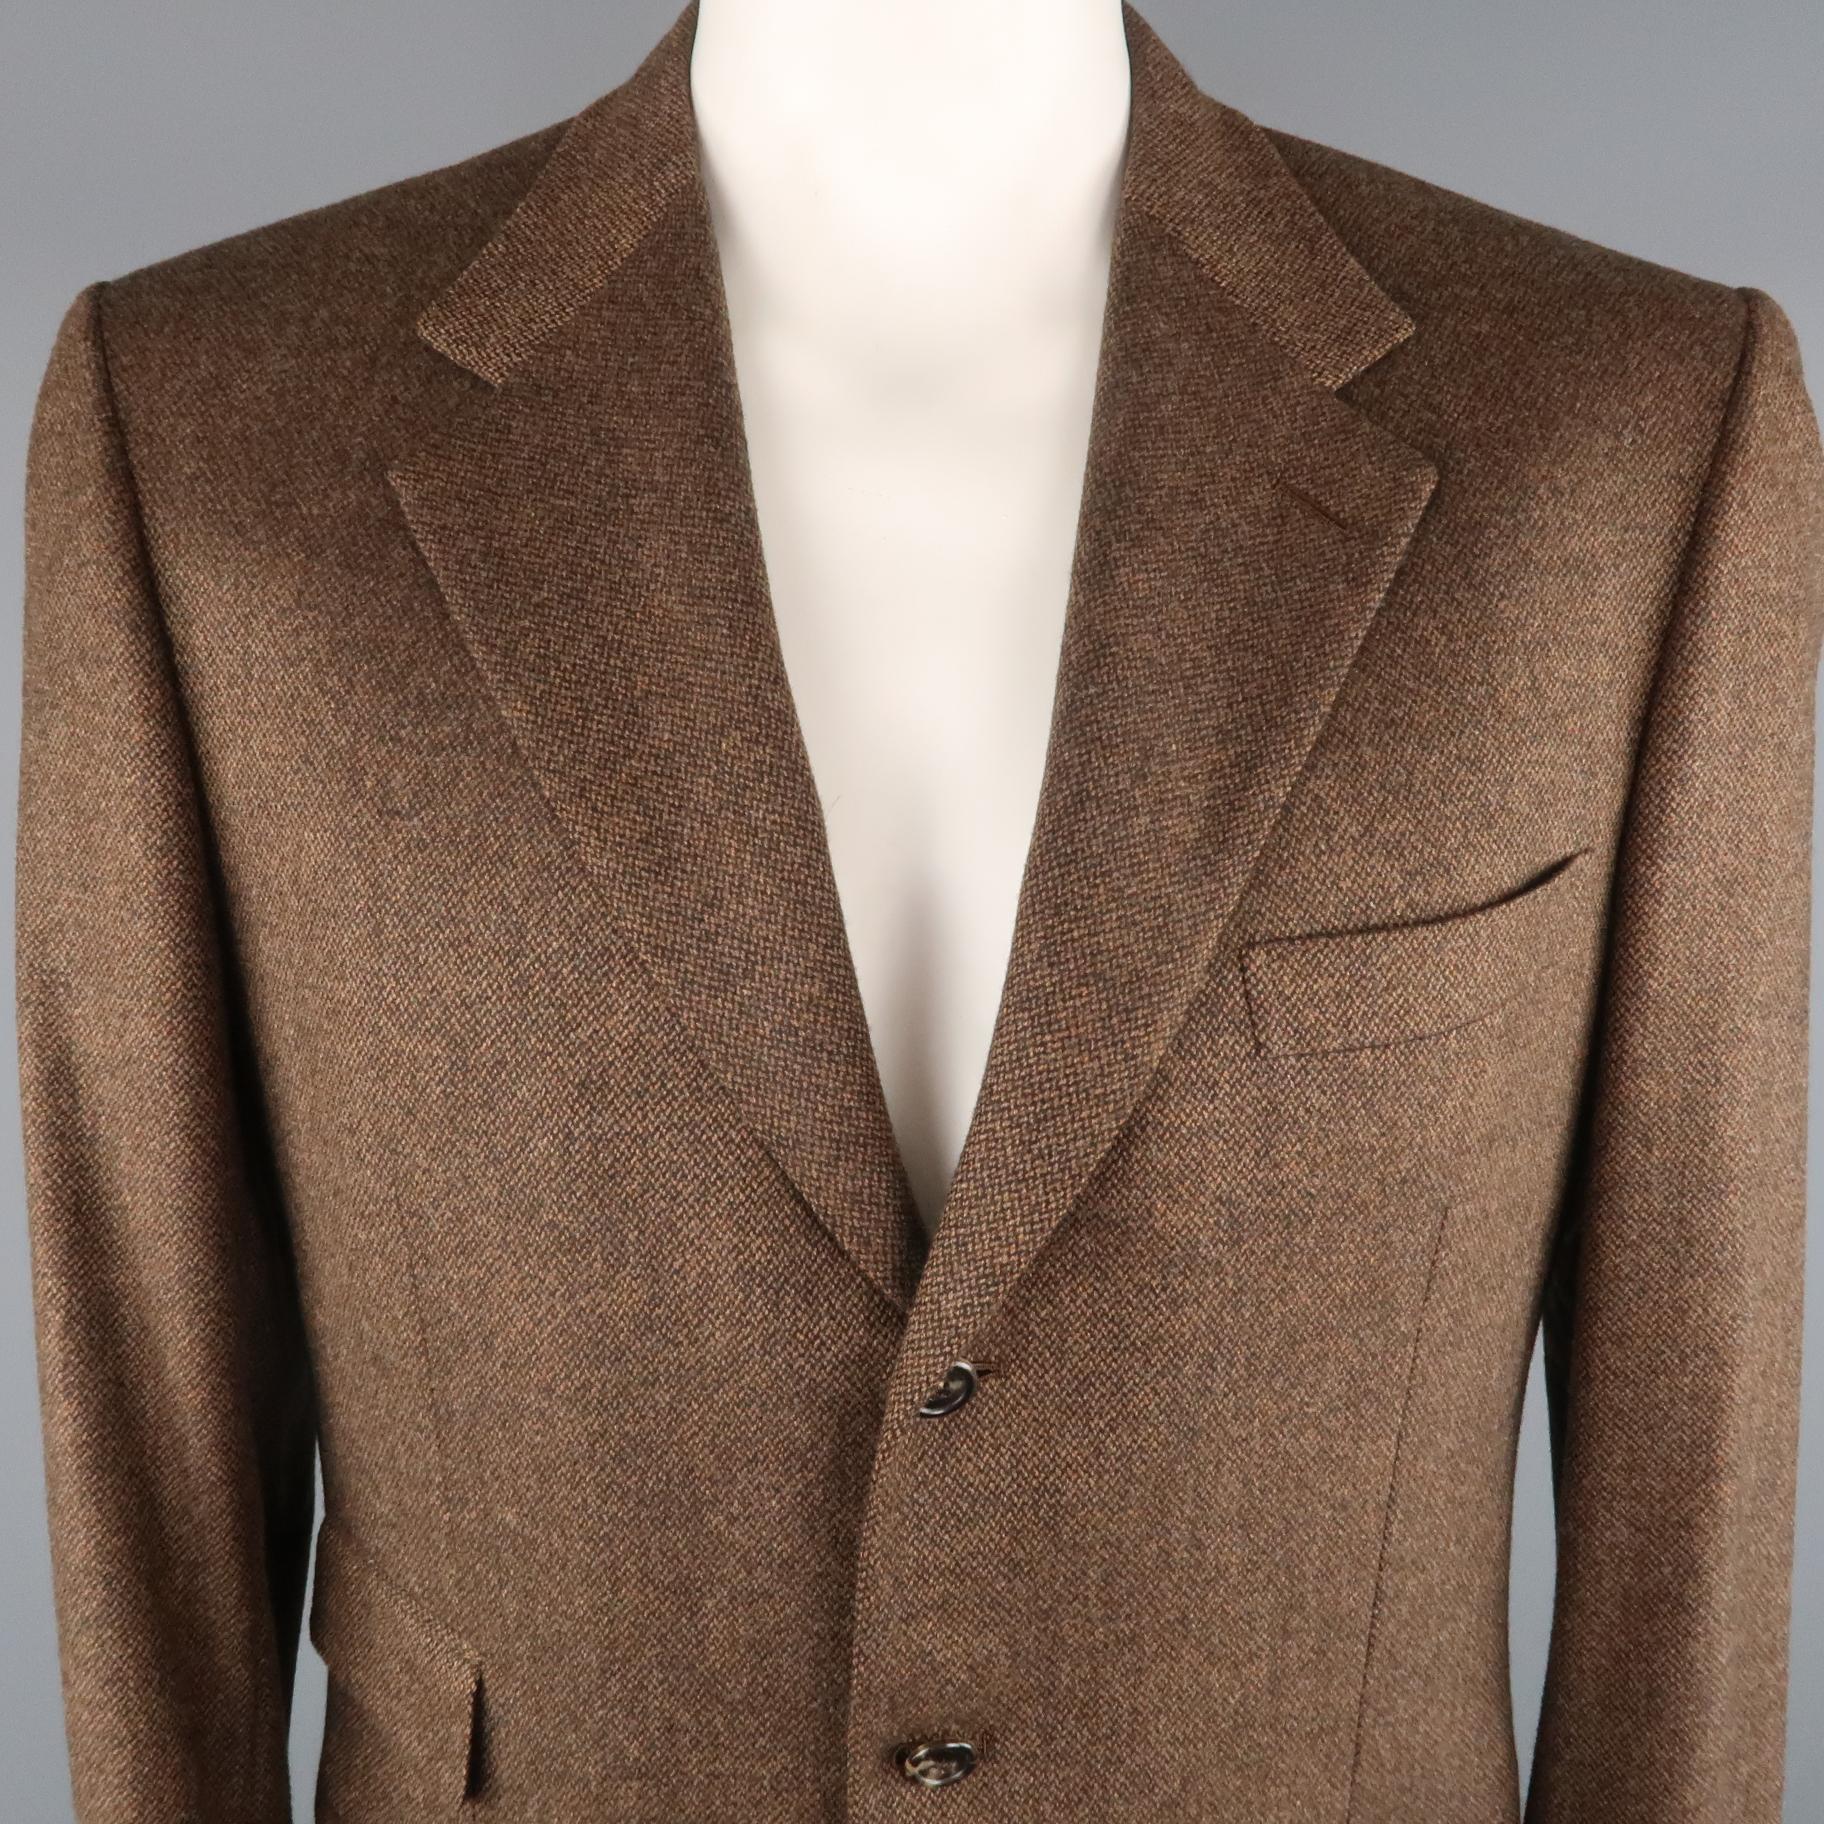 BRIONI Sport Coat comes in brown and black tones in a heather wool / cashmere material, with a notch lapel, slit and flap pockets, 3 buttons at closure, single breasted, and a double vent at back. Wear at lining.  Made in Italy.
 
Excellent  